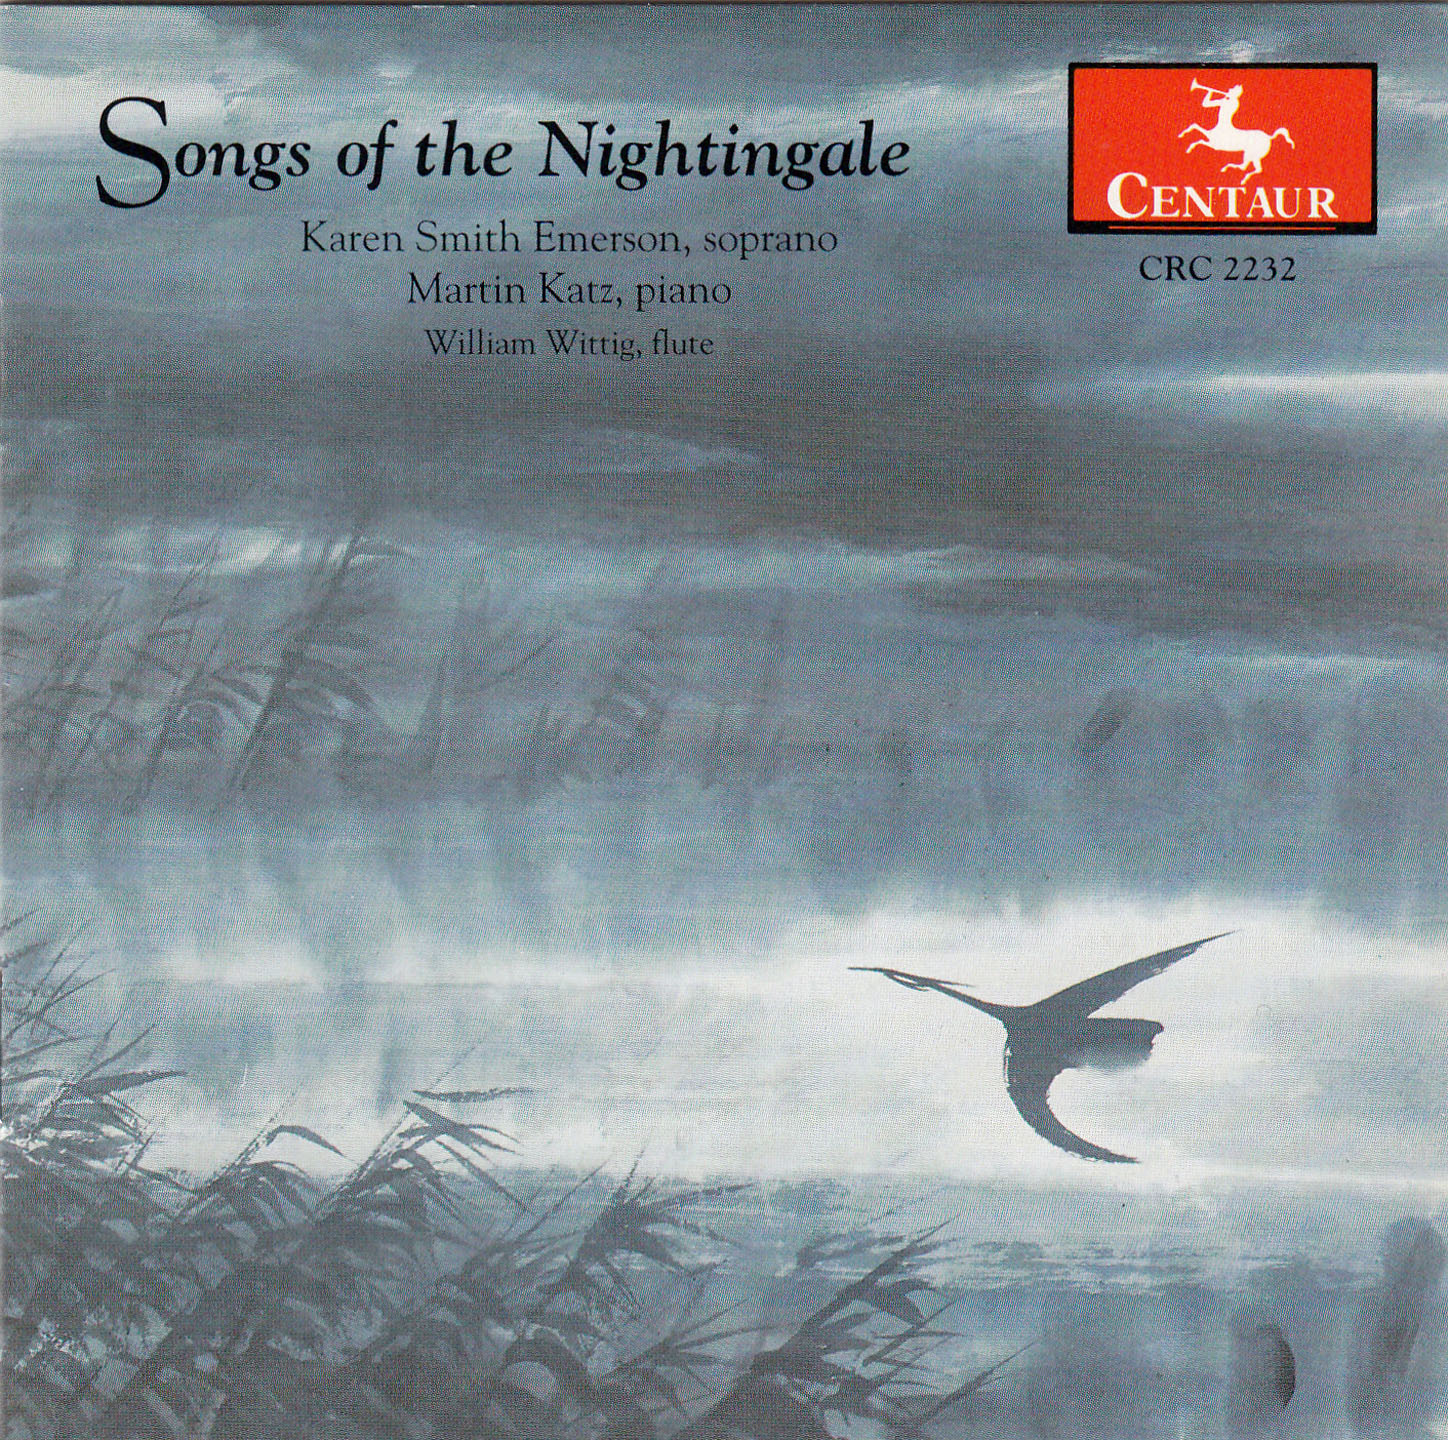 The Song of the Nightingale by Alys Clare